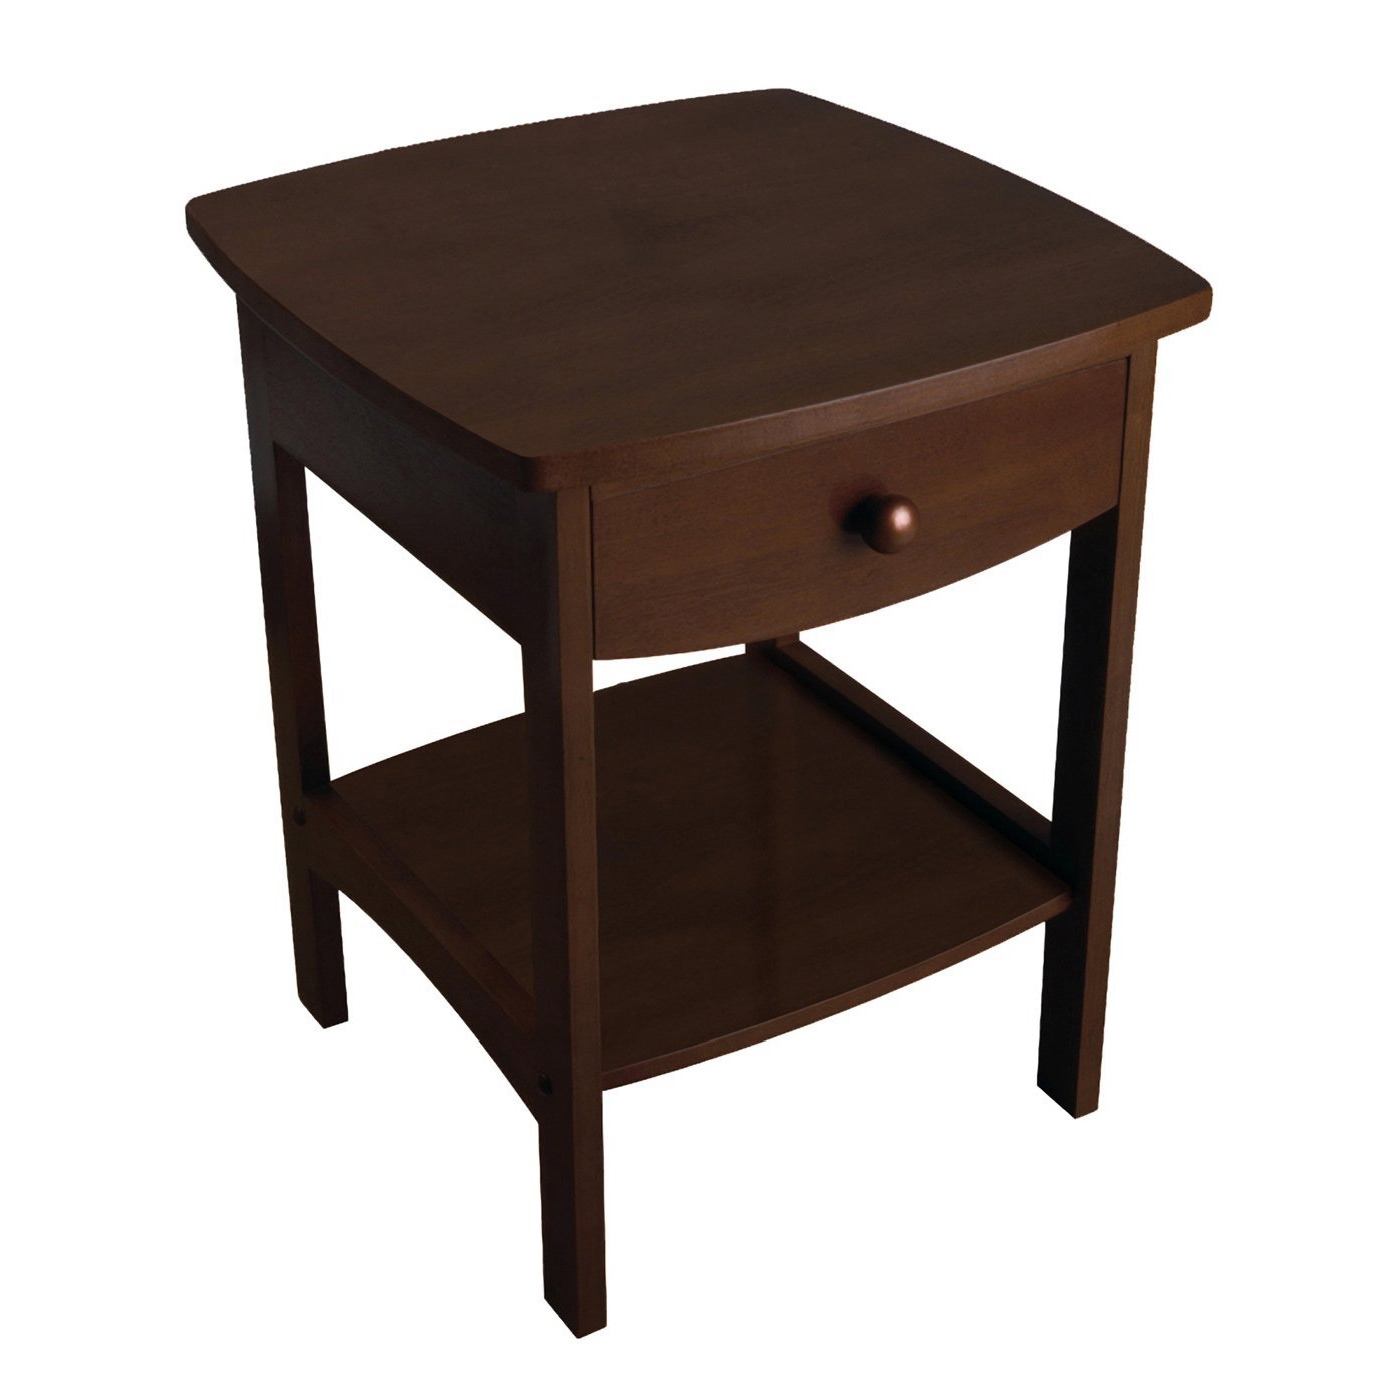 Walnut Finish Accent Table Nightstand with One Drawer